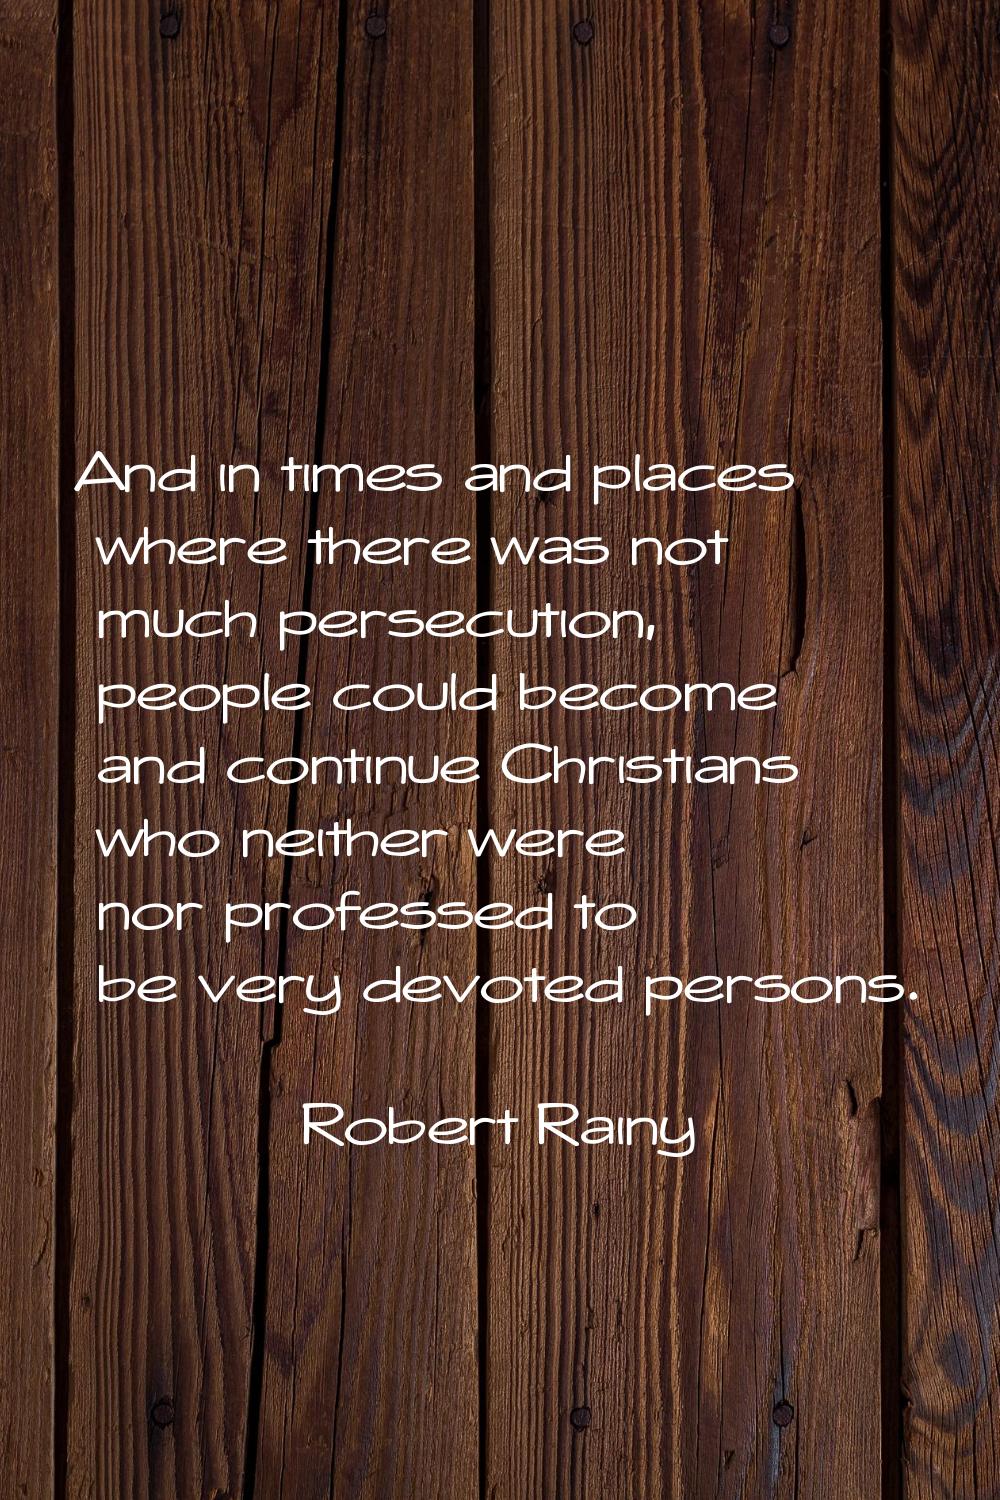 And in times and places where there was not much persecution, people could become and continue Chri